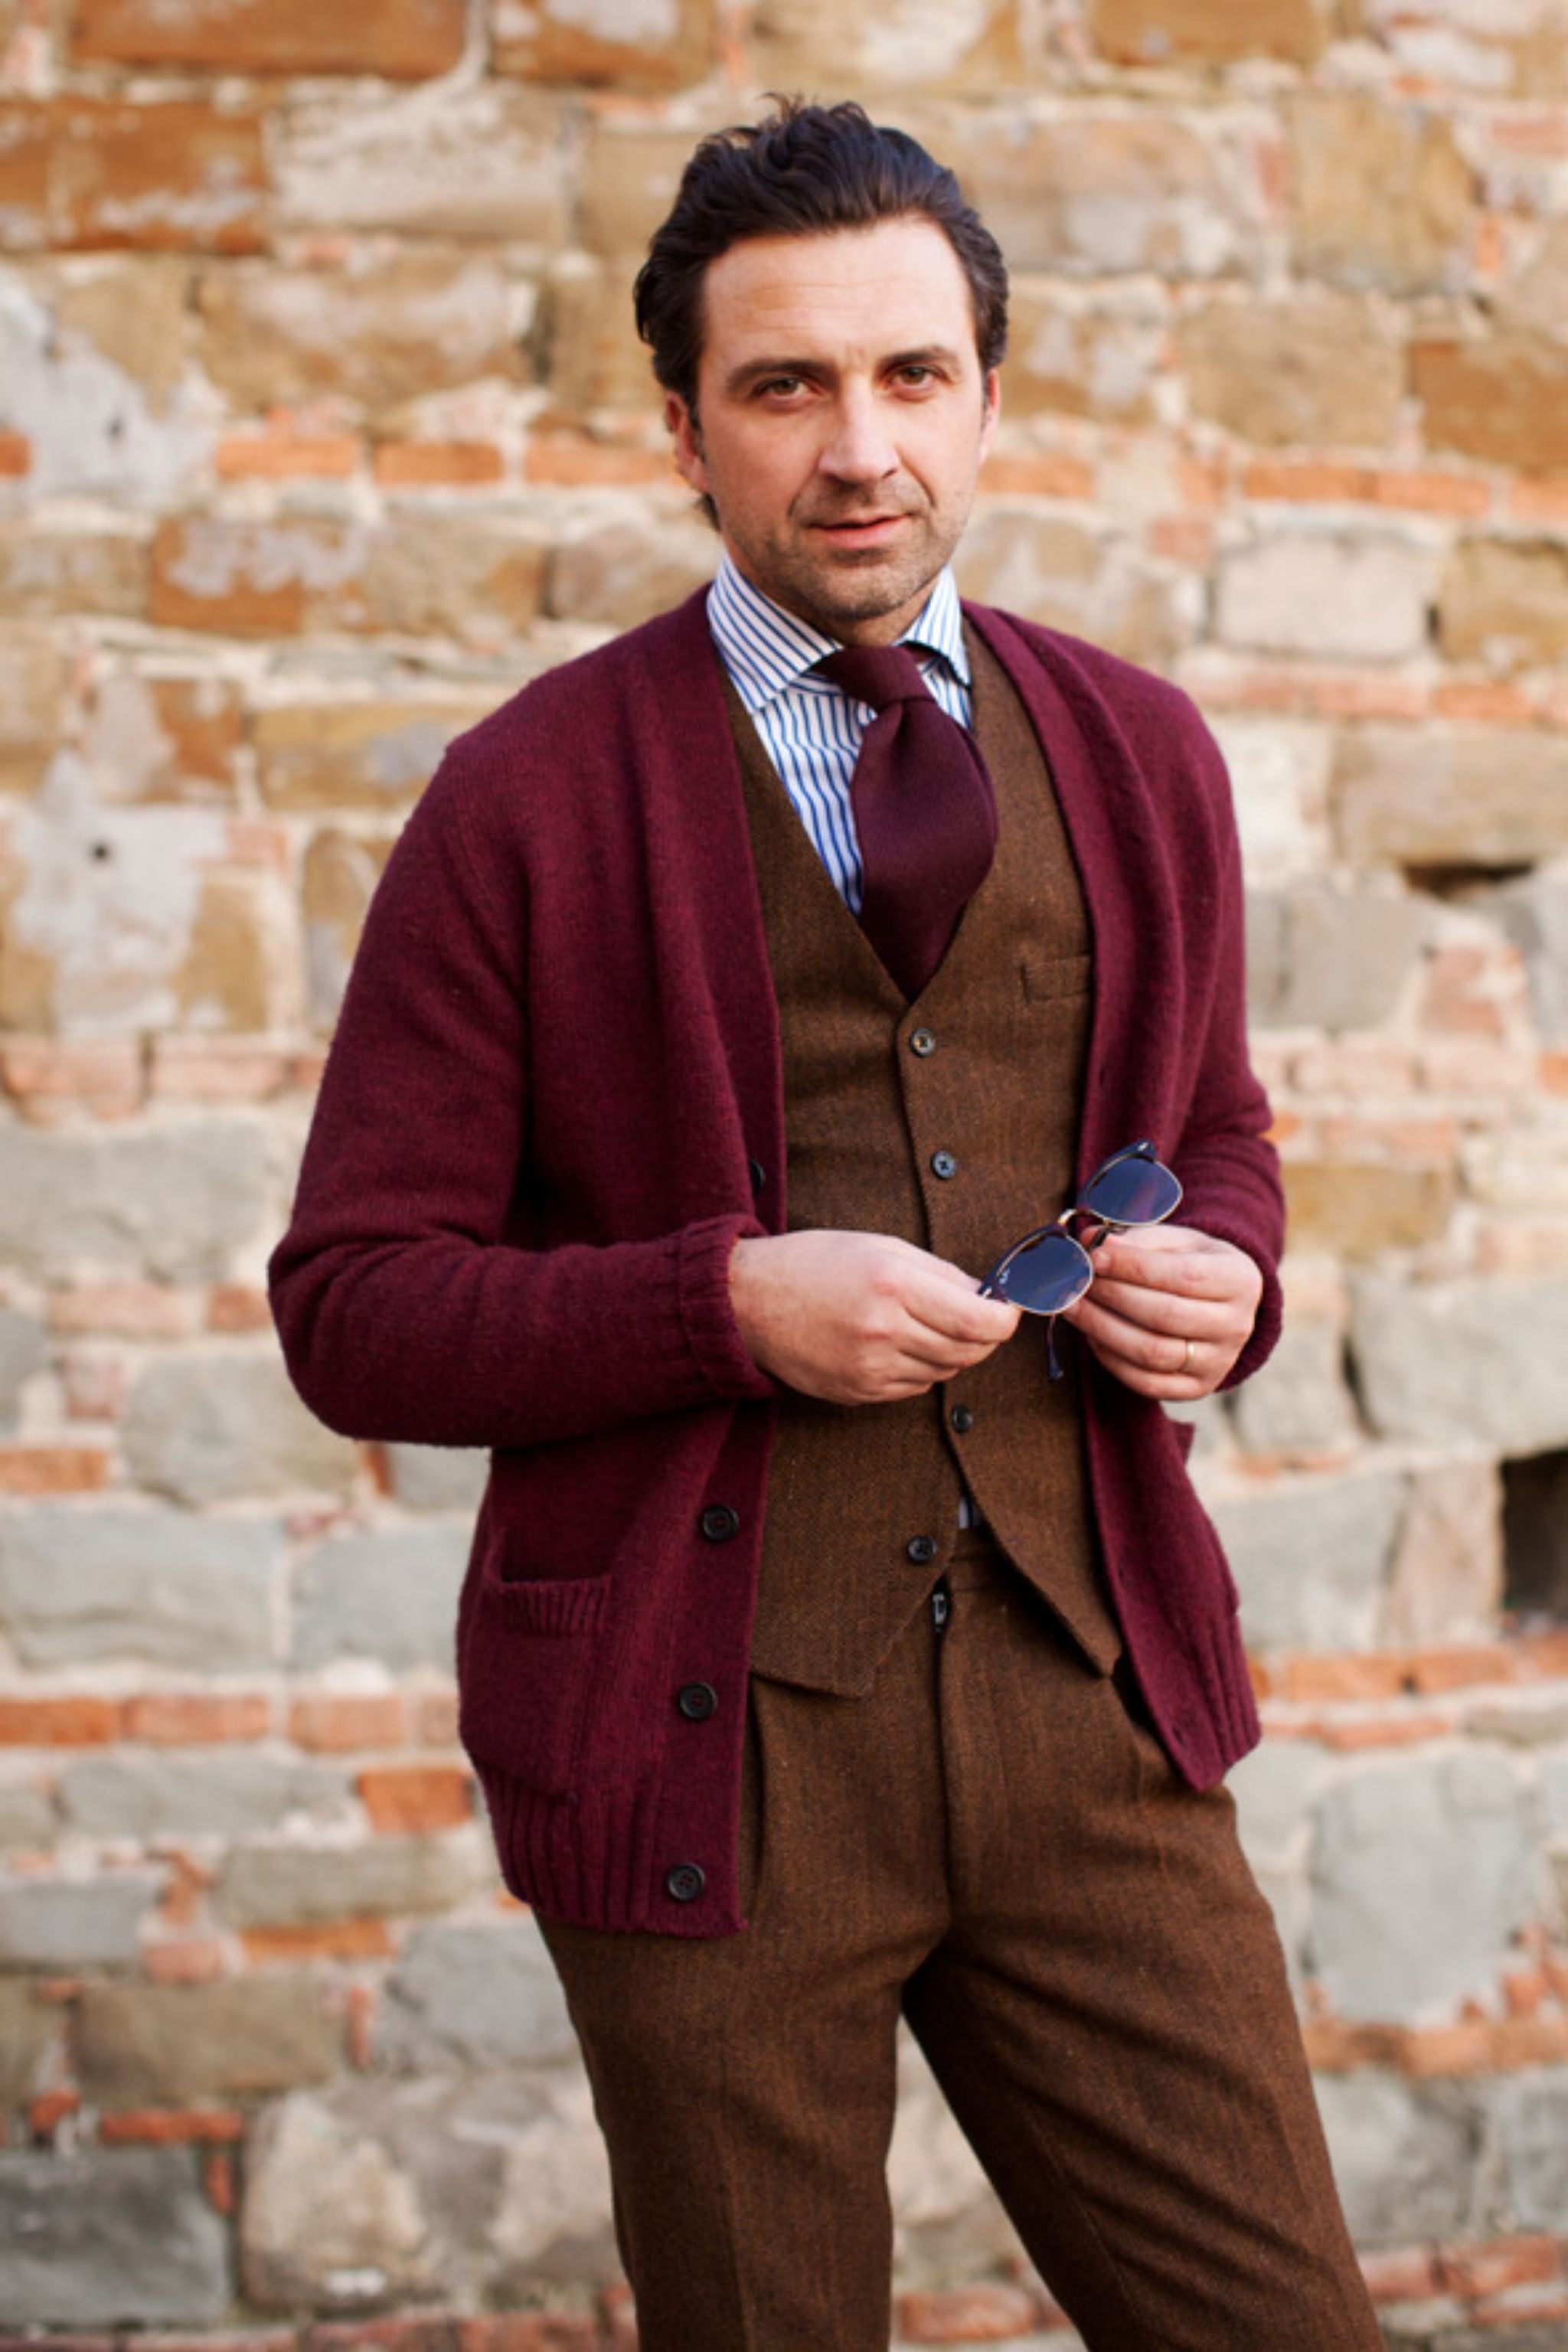 How about dressing down by replacing your three-piece suit jacket with a cardigan? Inspiring color-play with the tones of brown and burgundy. Pic by The Sartorialist.